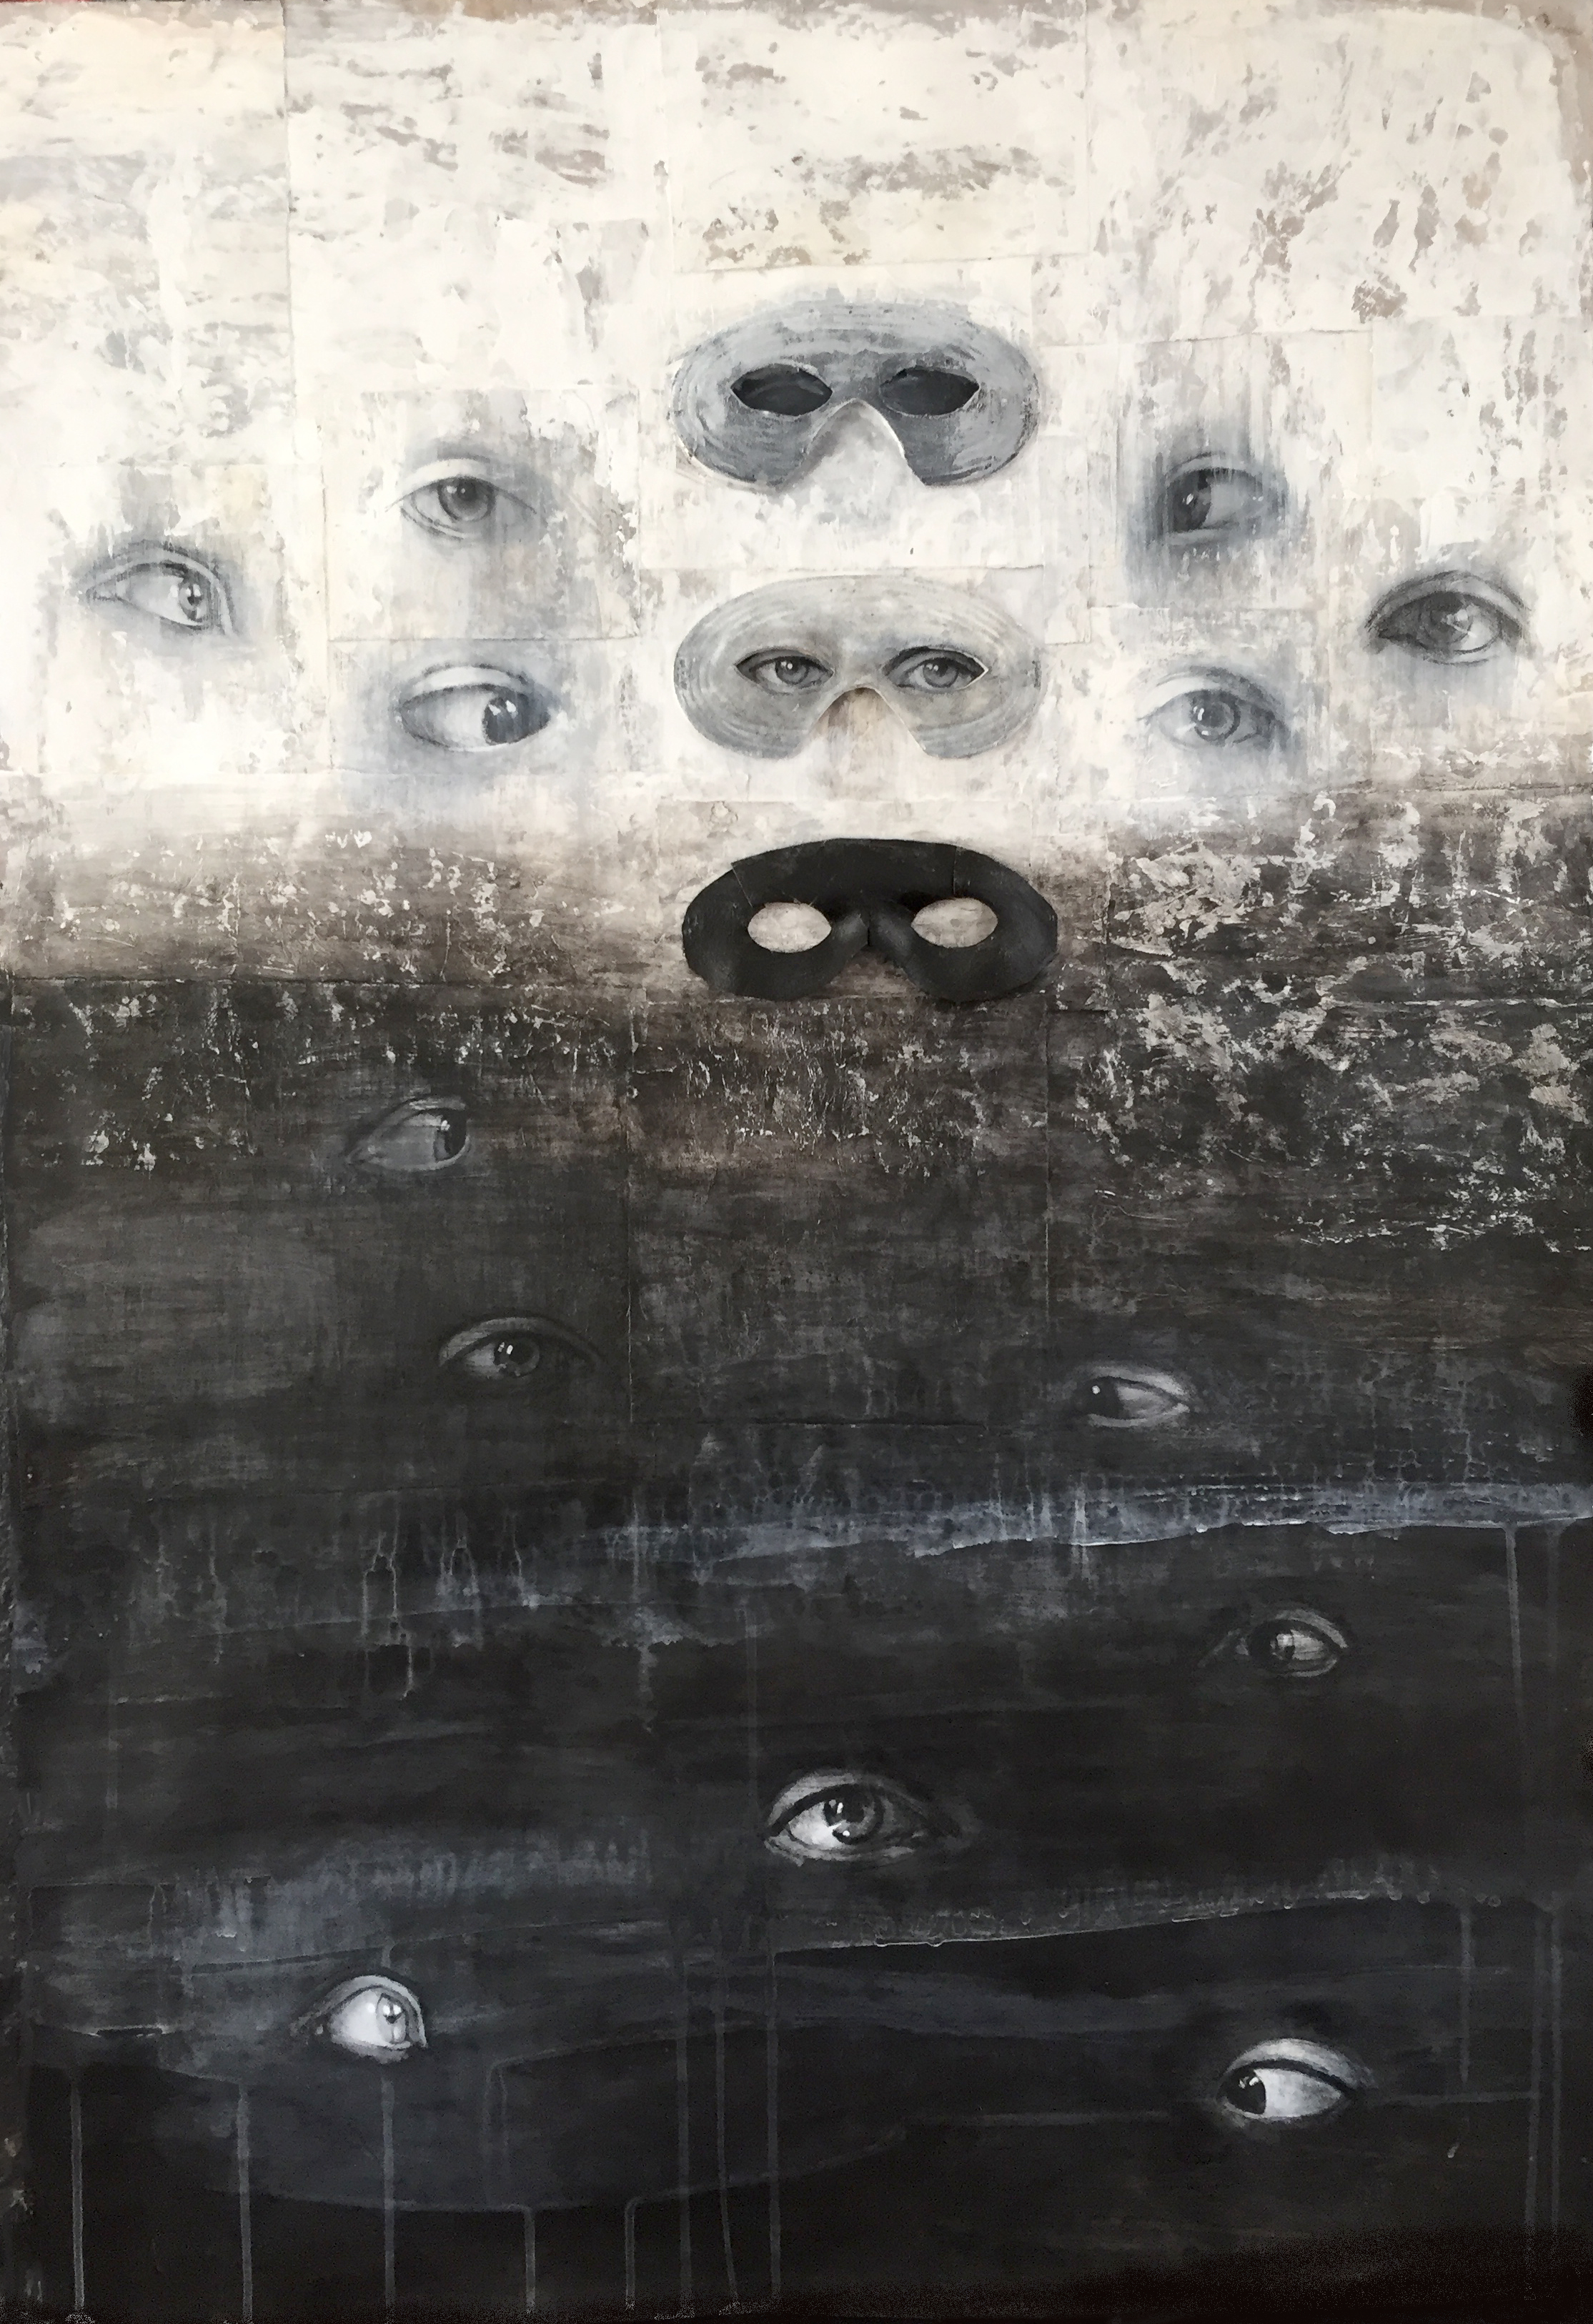 "Surveillance Series: Masks", Acrylic, charcoal, chalk, collage on paper, 40"W x 60"H